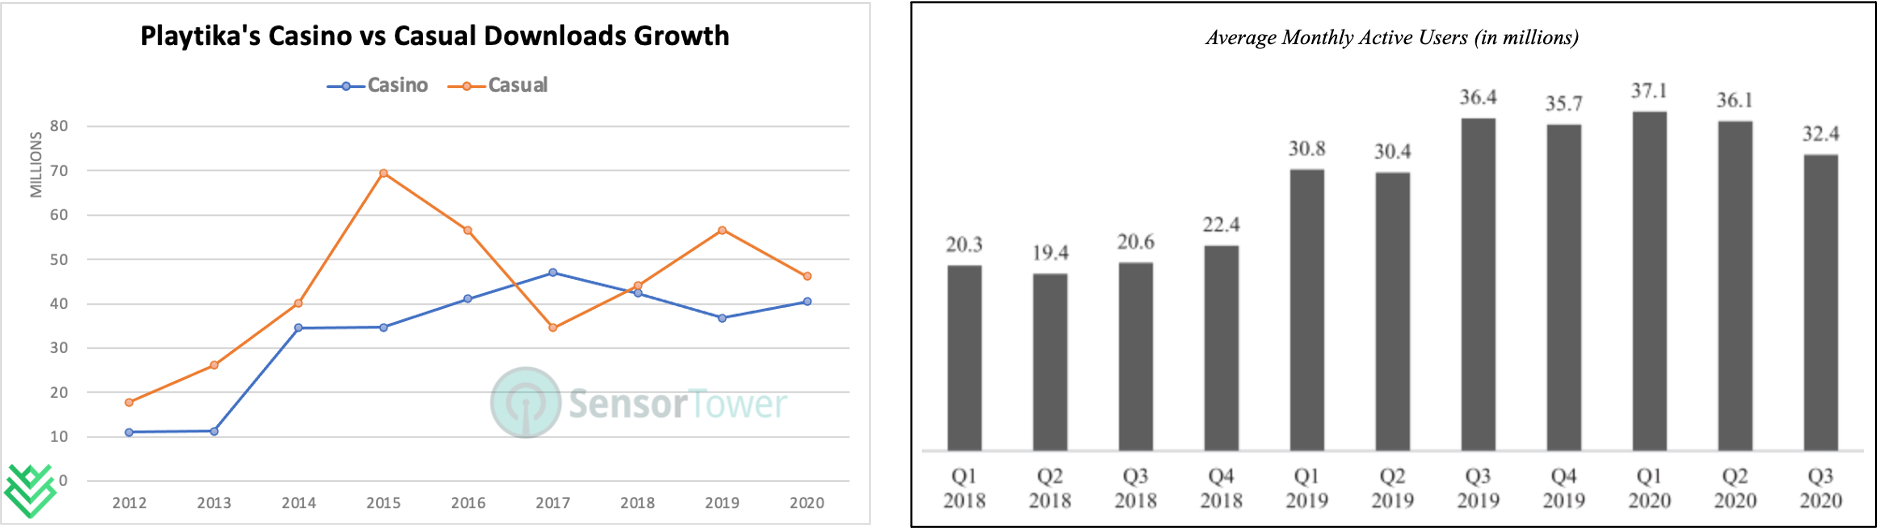 Playtika’s MAU has suffered some stagnation since Q1 2019 and no growth over 2020. | Source: Sensor Tower